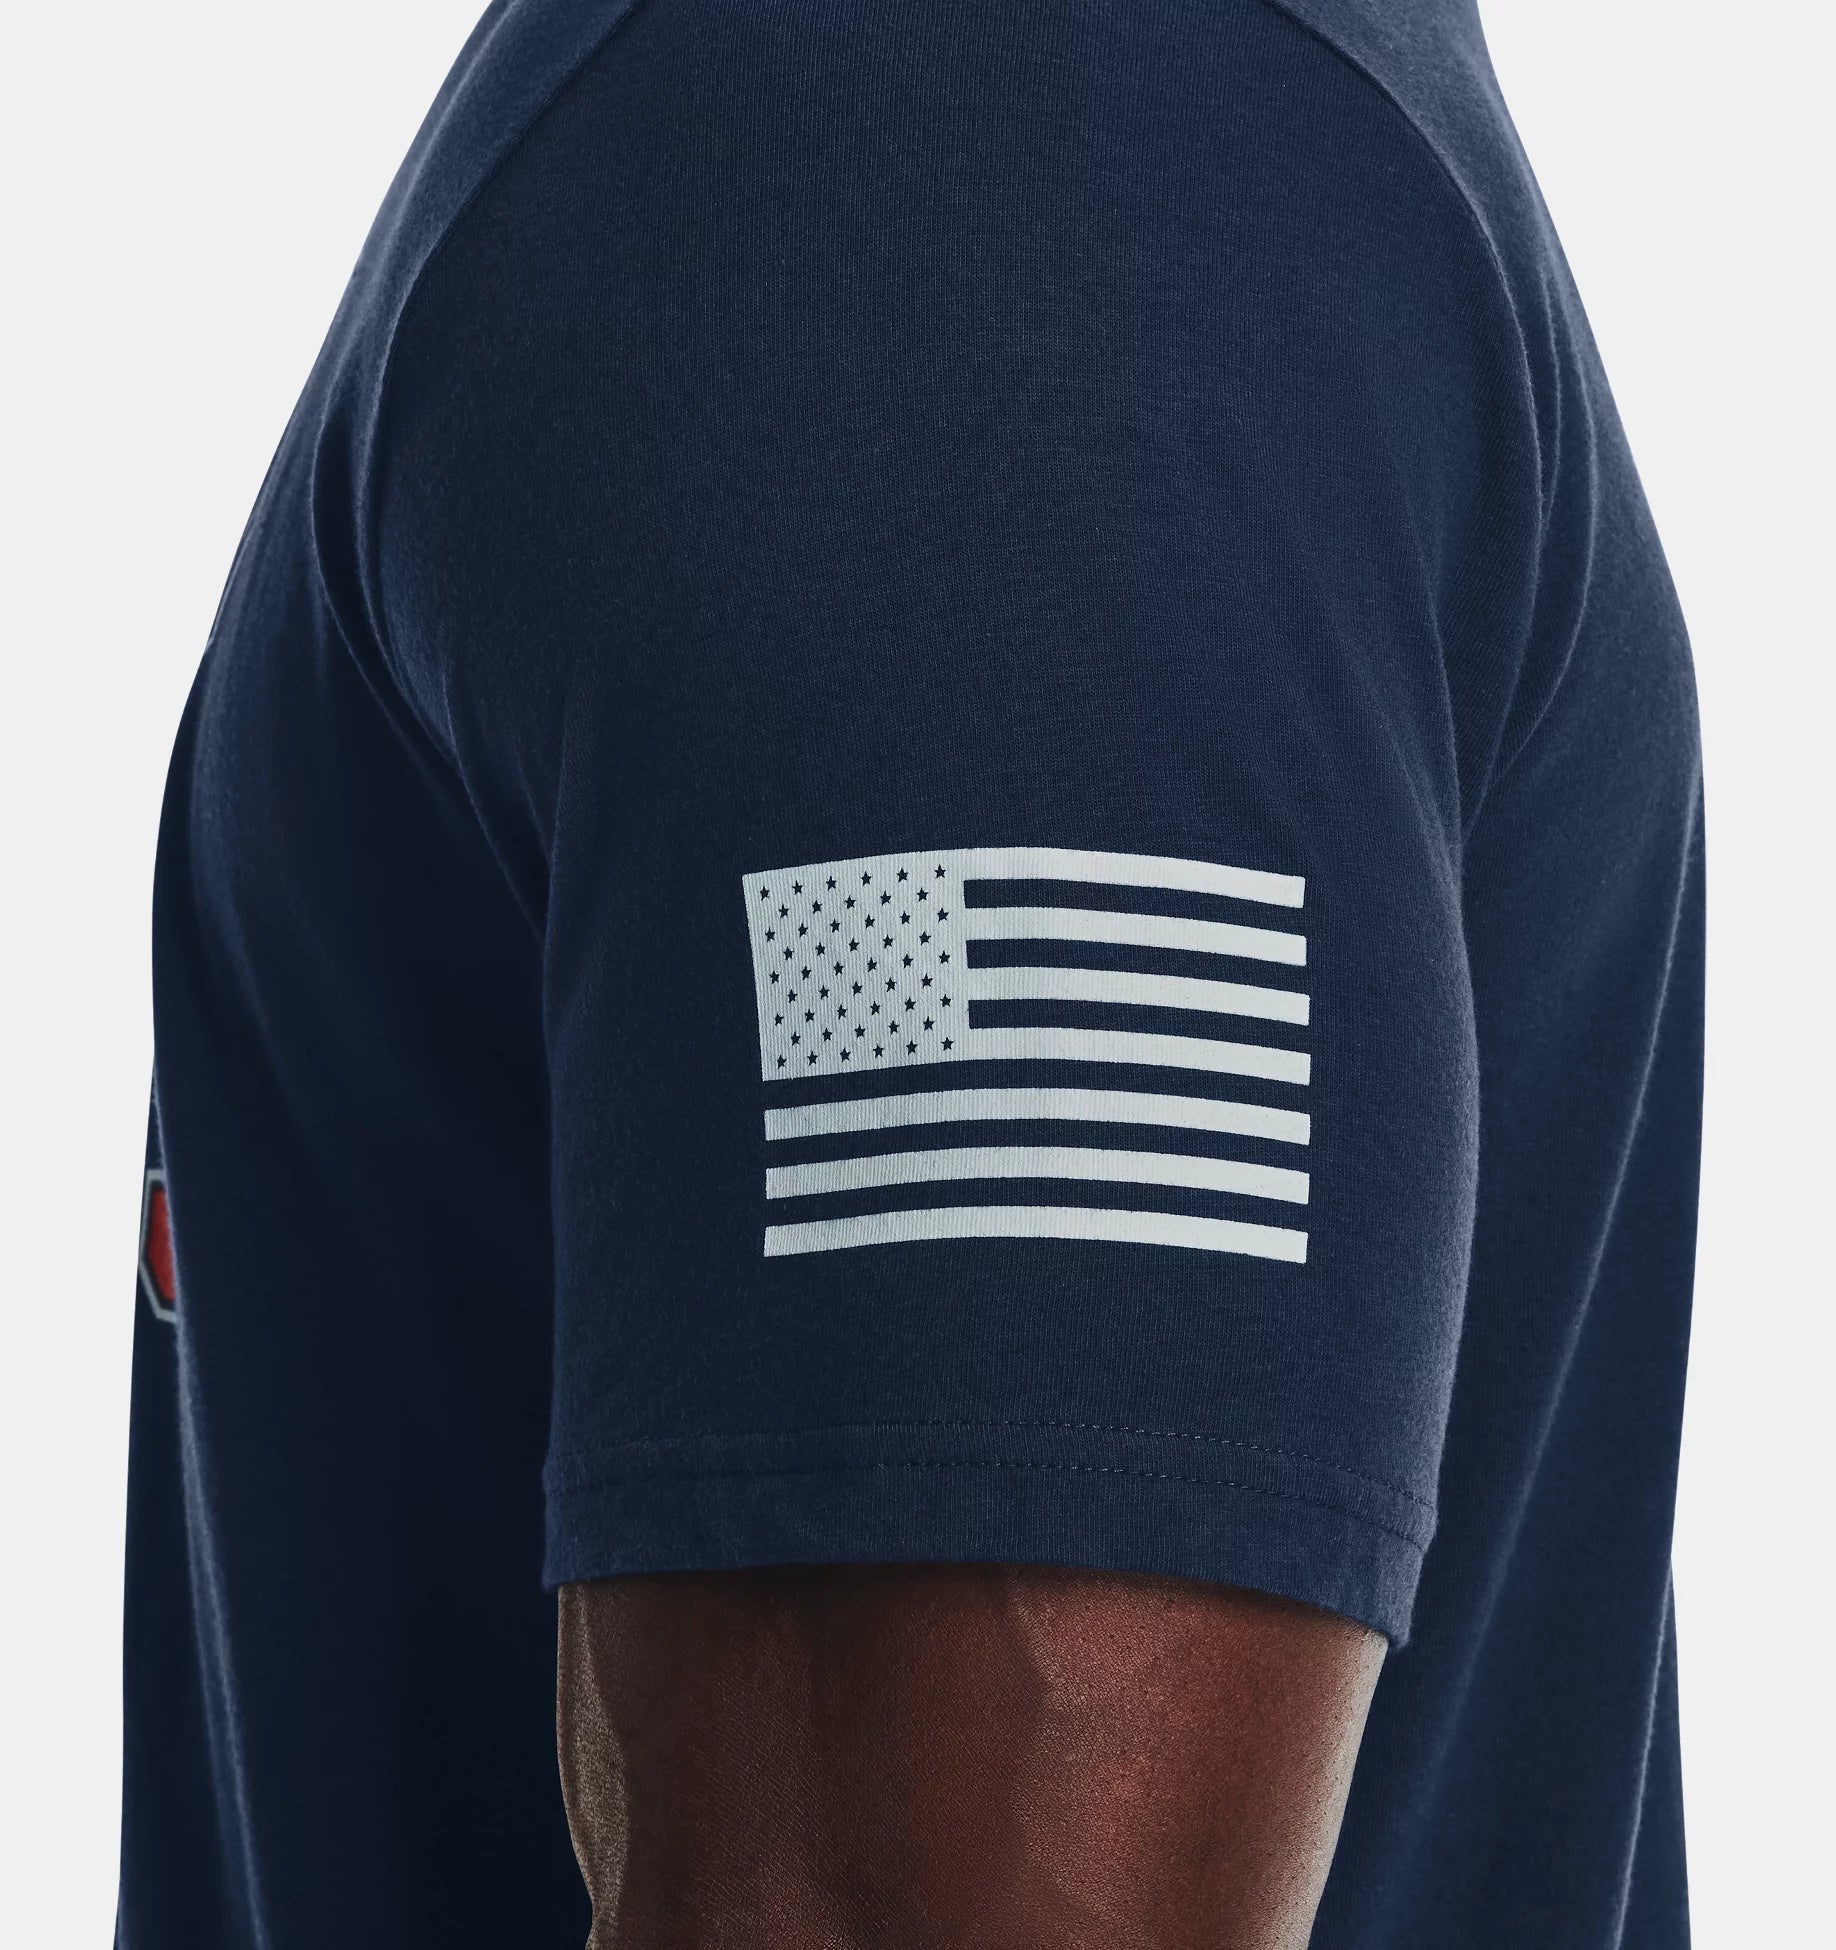 Under Armour Freedom USA T-Shirt (Navy)